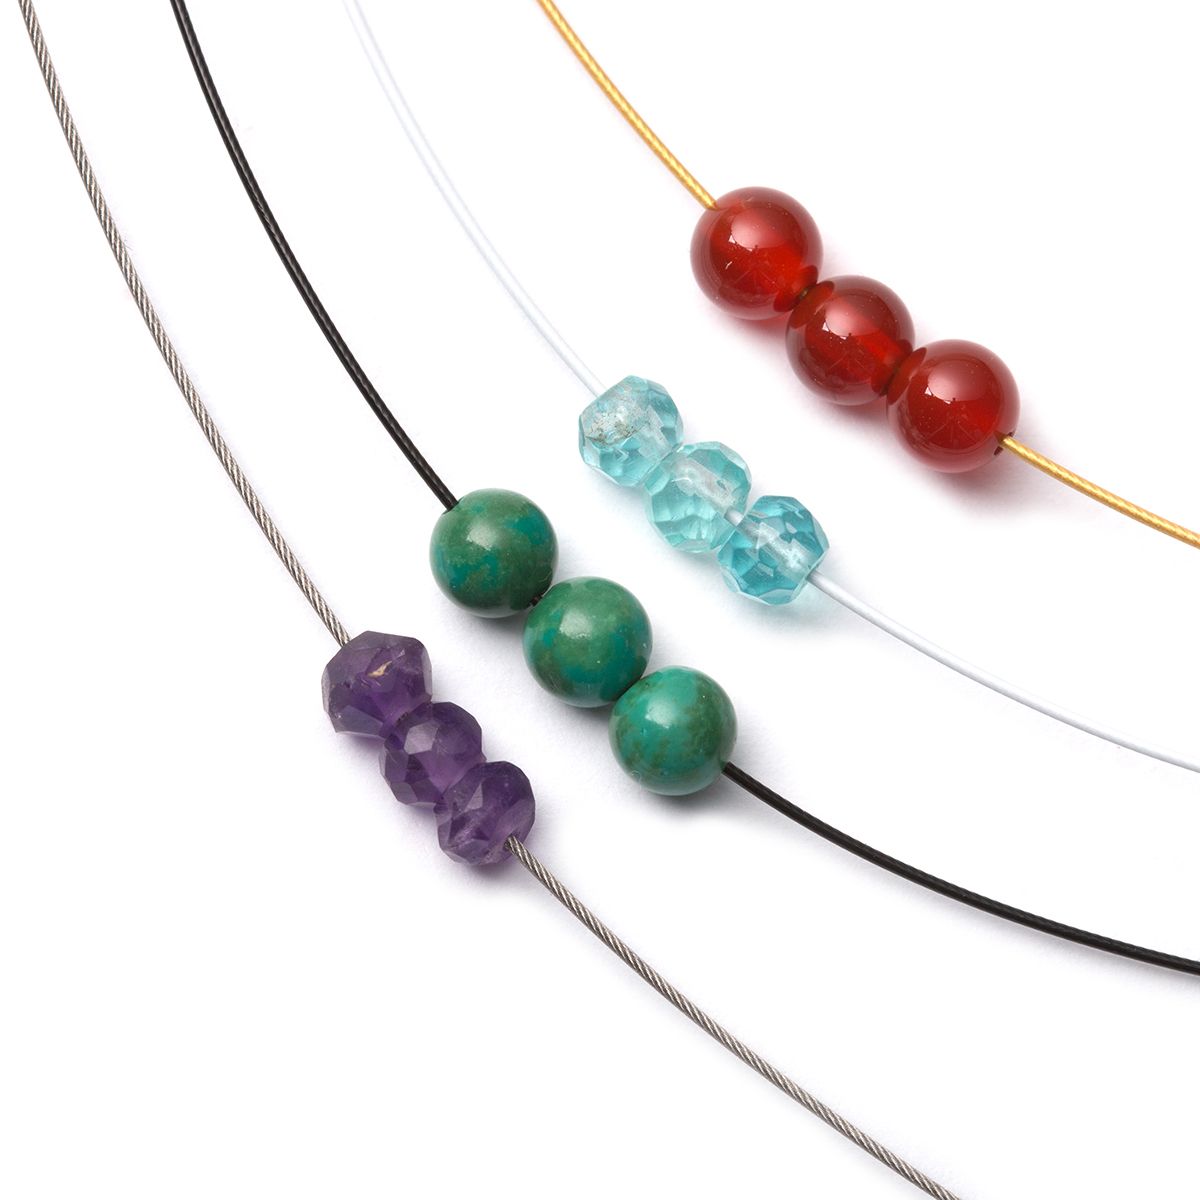 What Type of Wire Is Suitable for Beading?